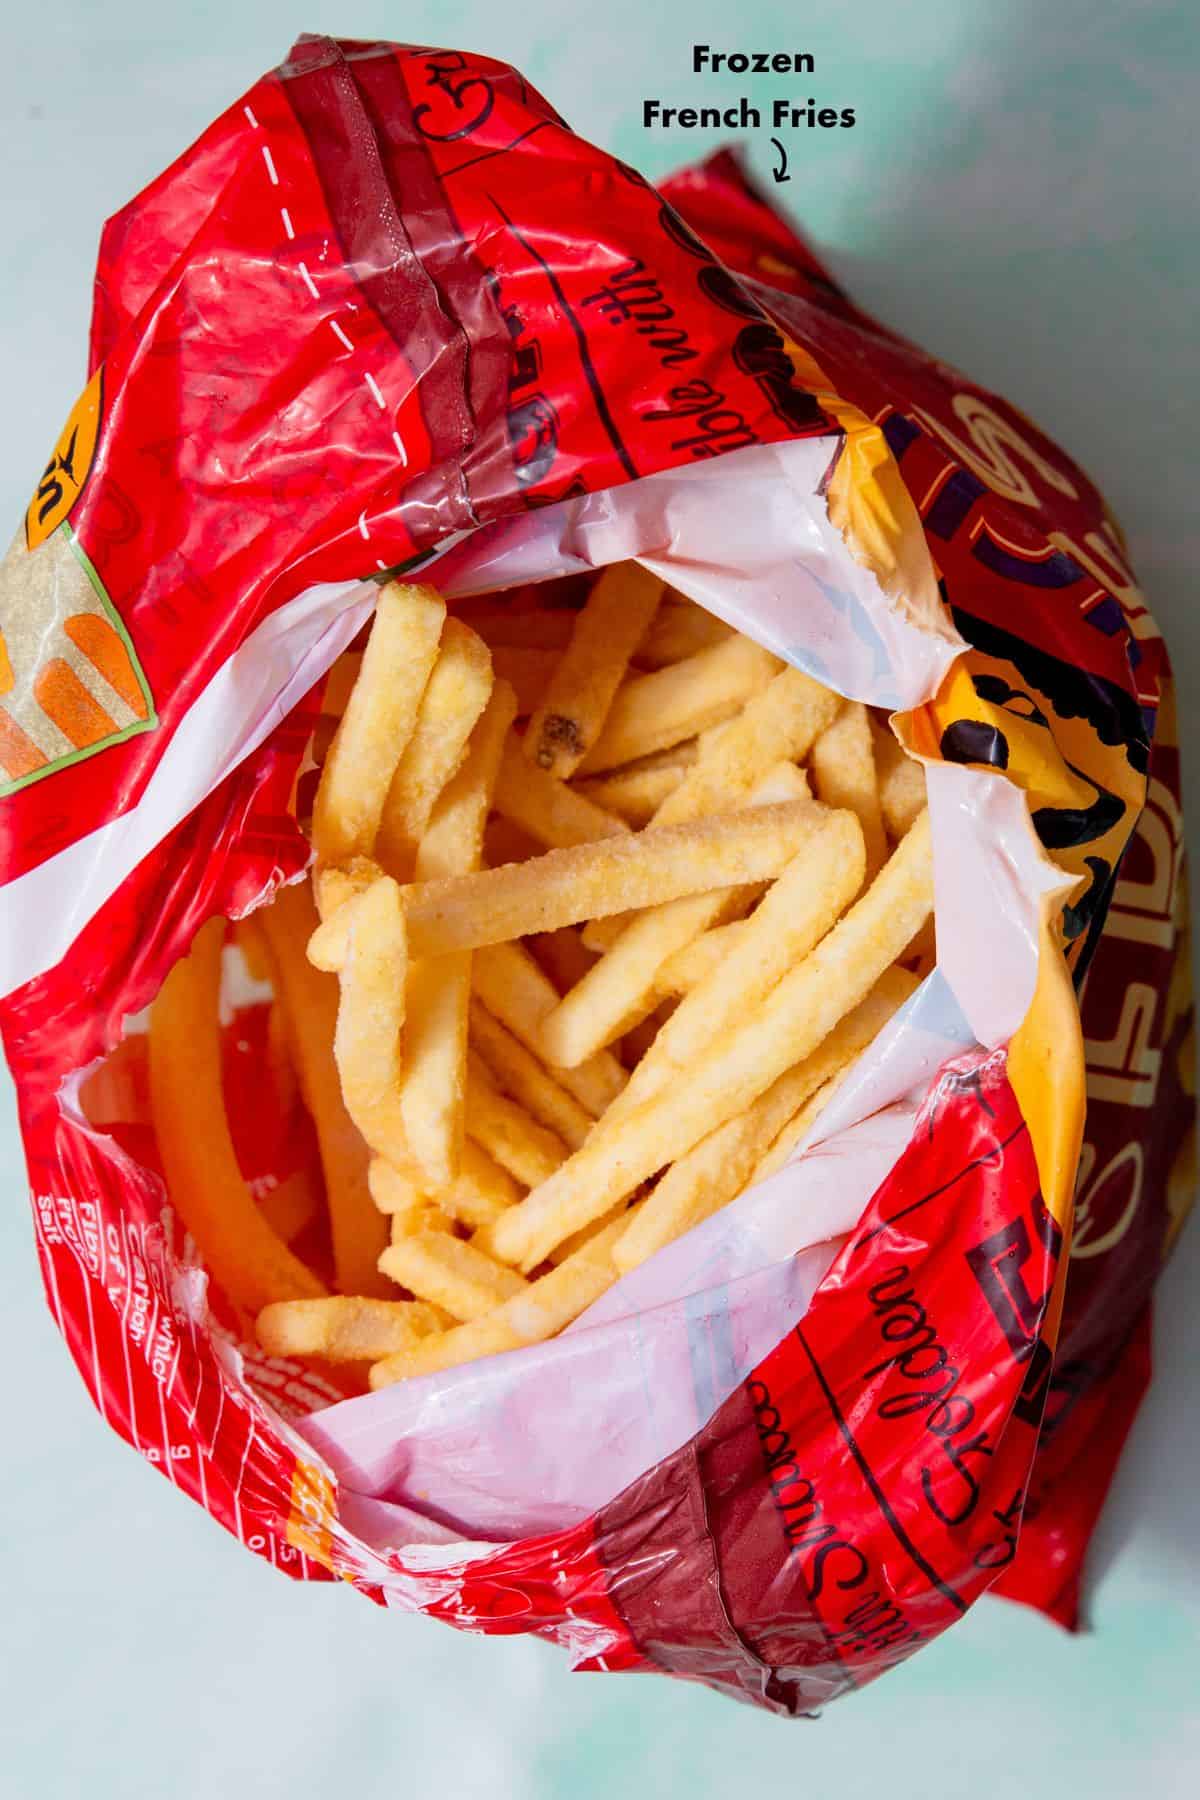 An open plastic packaging with frozen French fries.